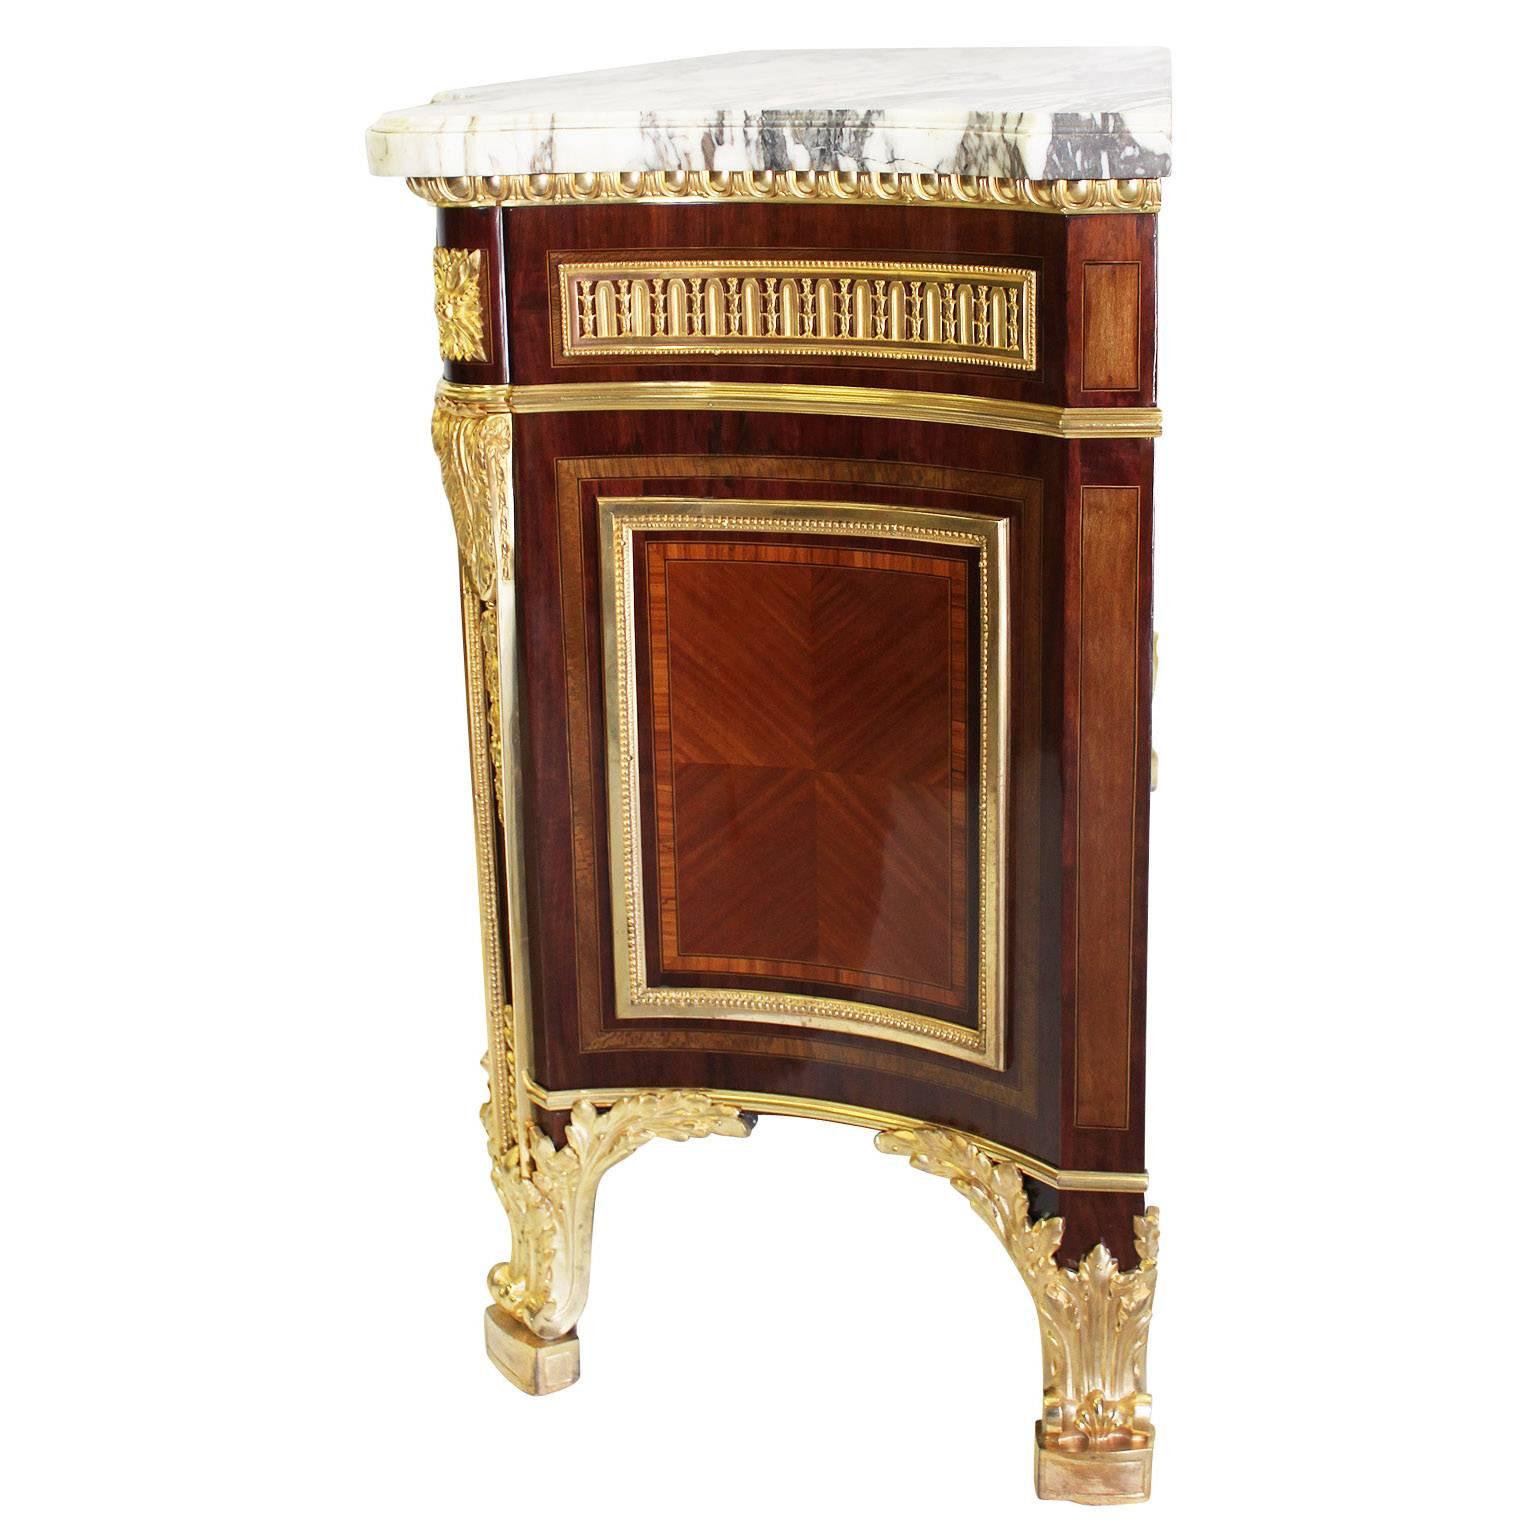 Fine French 19th Century Louis XVI Style Ormolu-Mounted Tulipwood Commode In Good Condition For Sale In Los Angeles, CA